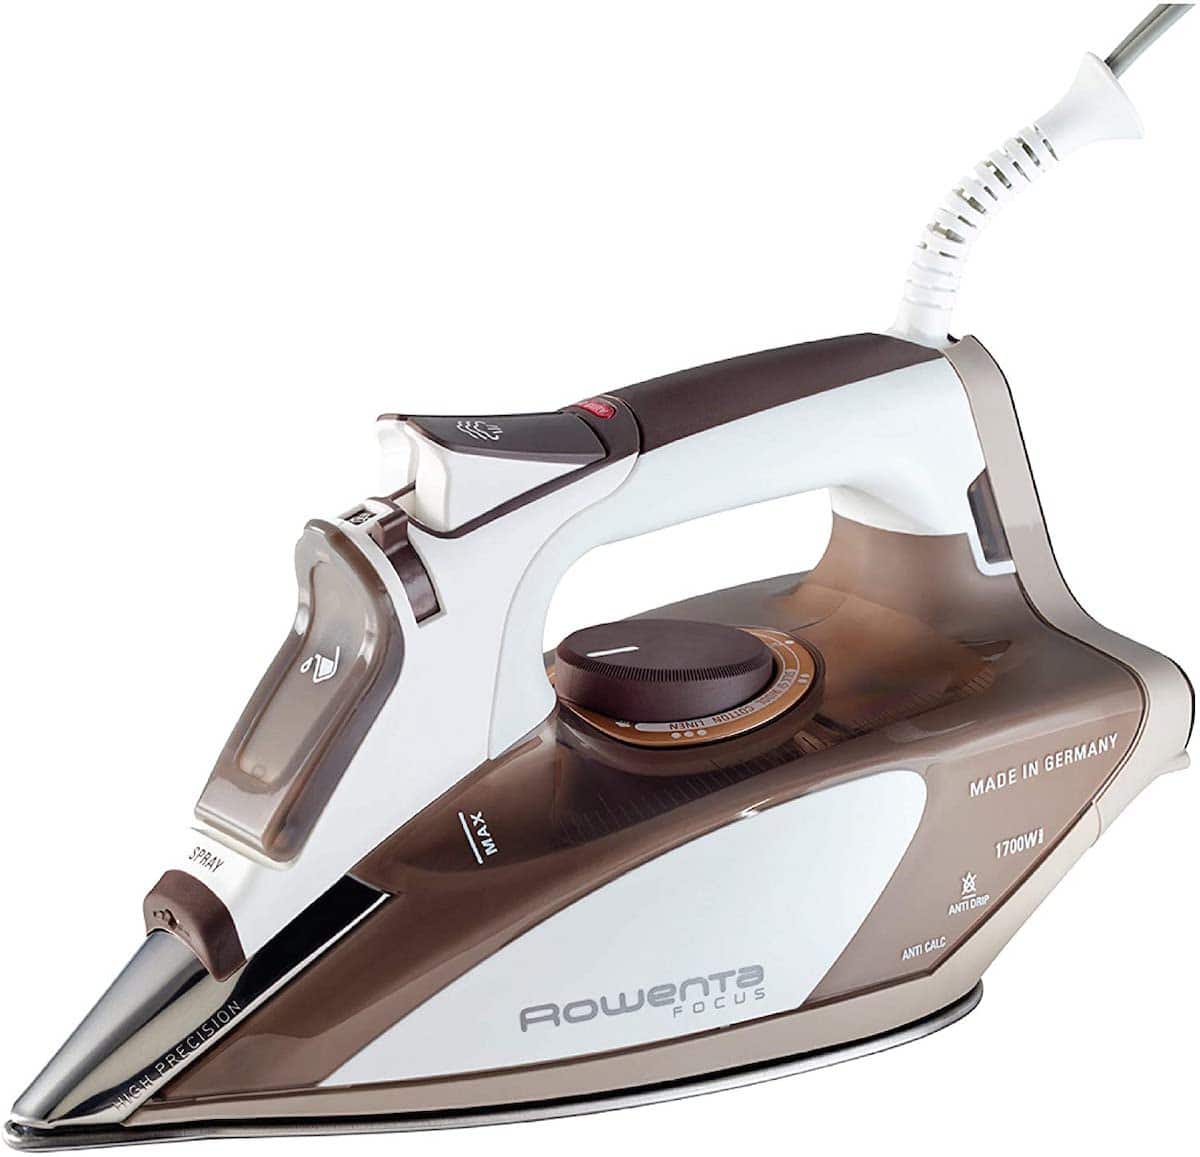 Rowenta DW5080 1700-Watt Micro Steam Iron Stainless Steel Soleplate with Auto-Off